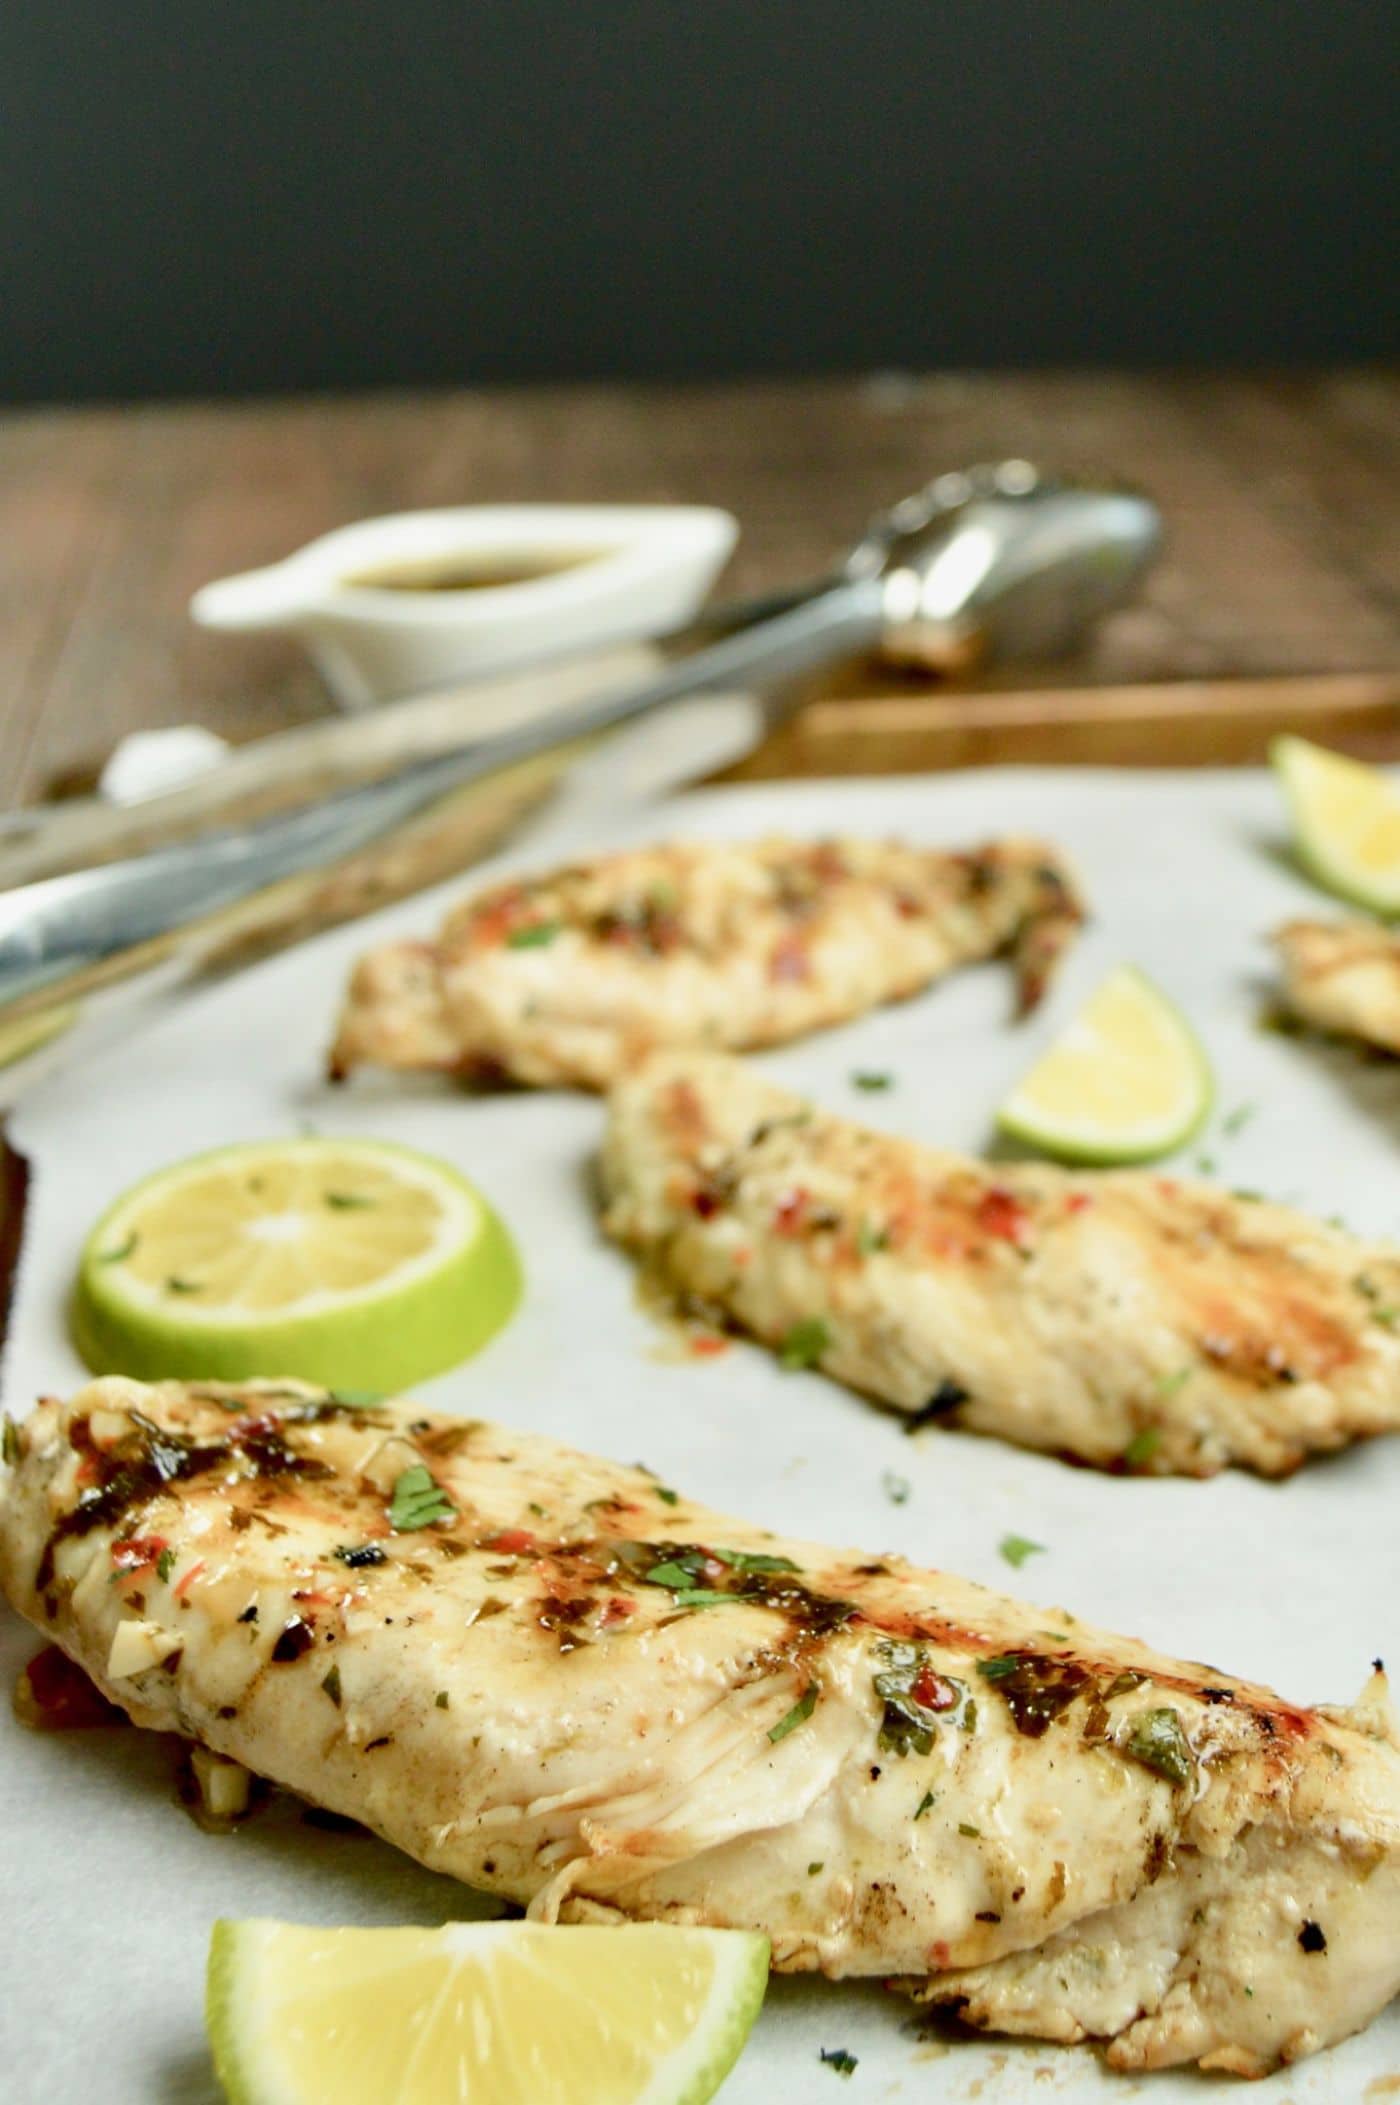 Grilled Chili Lime Chicken is full of flavor AND still healthy, marinated overnight, grilled to tender juicy perfection. Excellent for summer entertaining!